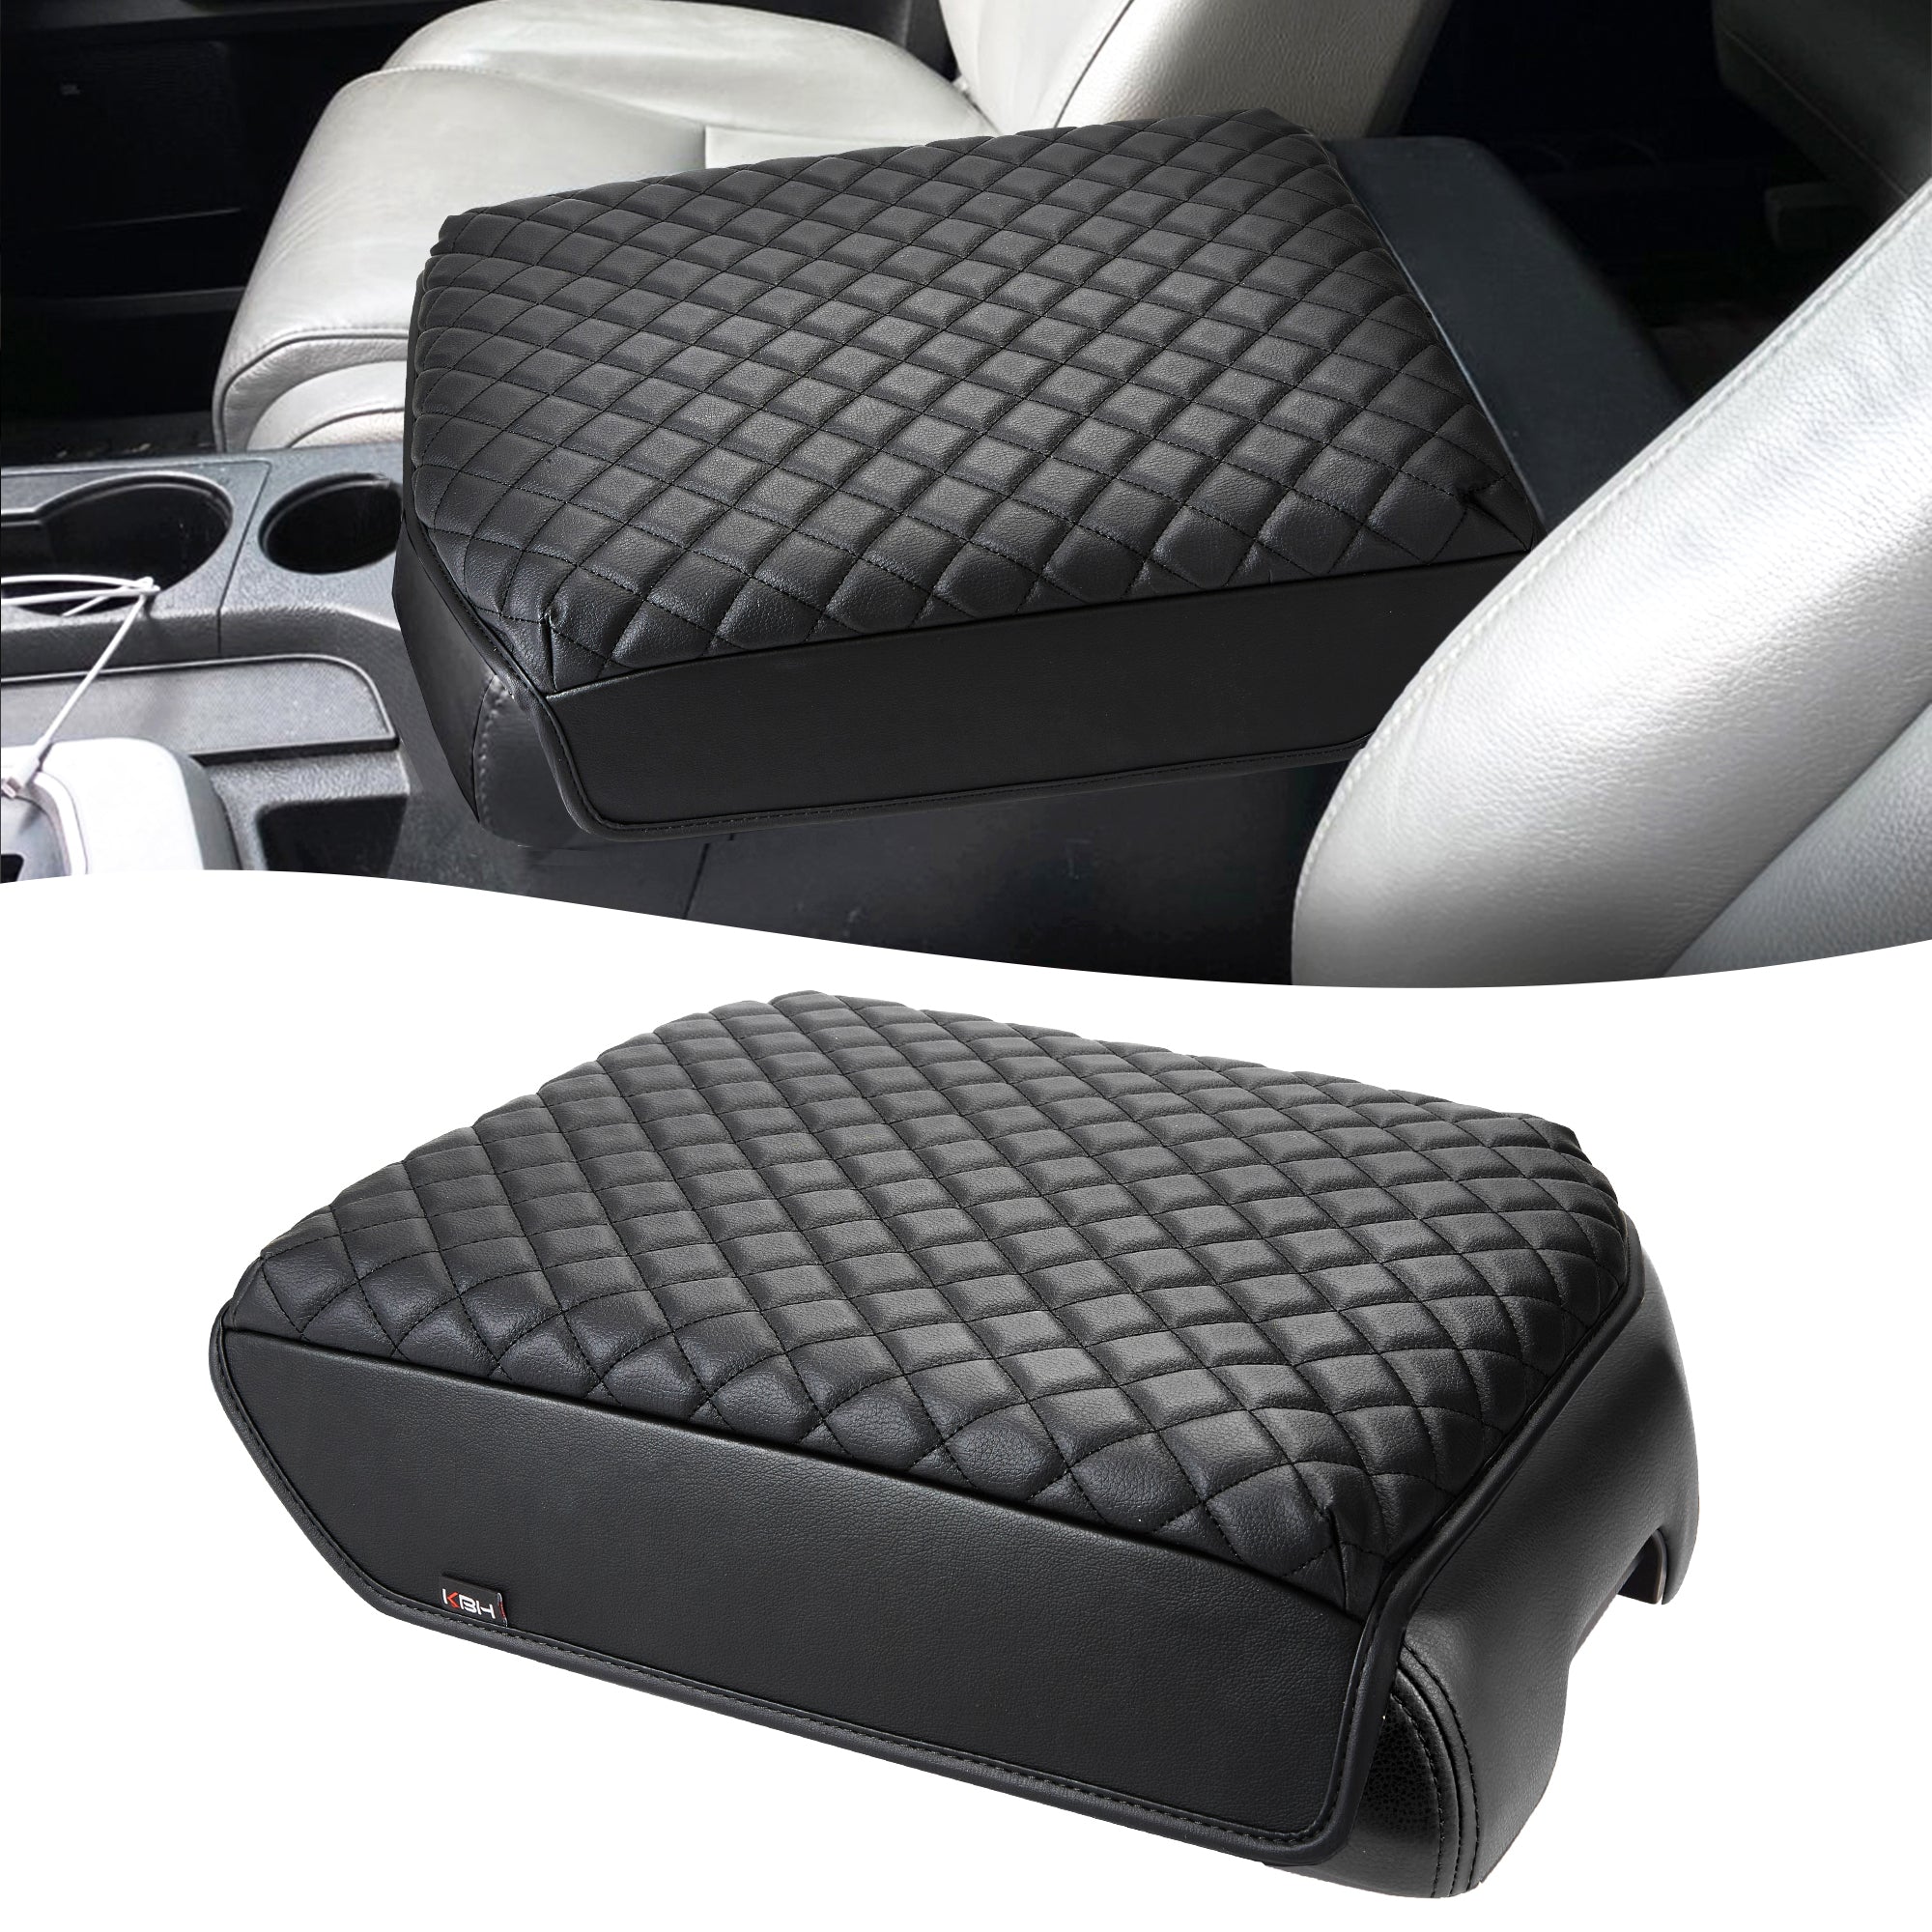 Xinrsheag Leather Center Console Cover Armrest Pad, Protector